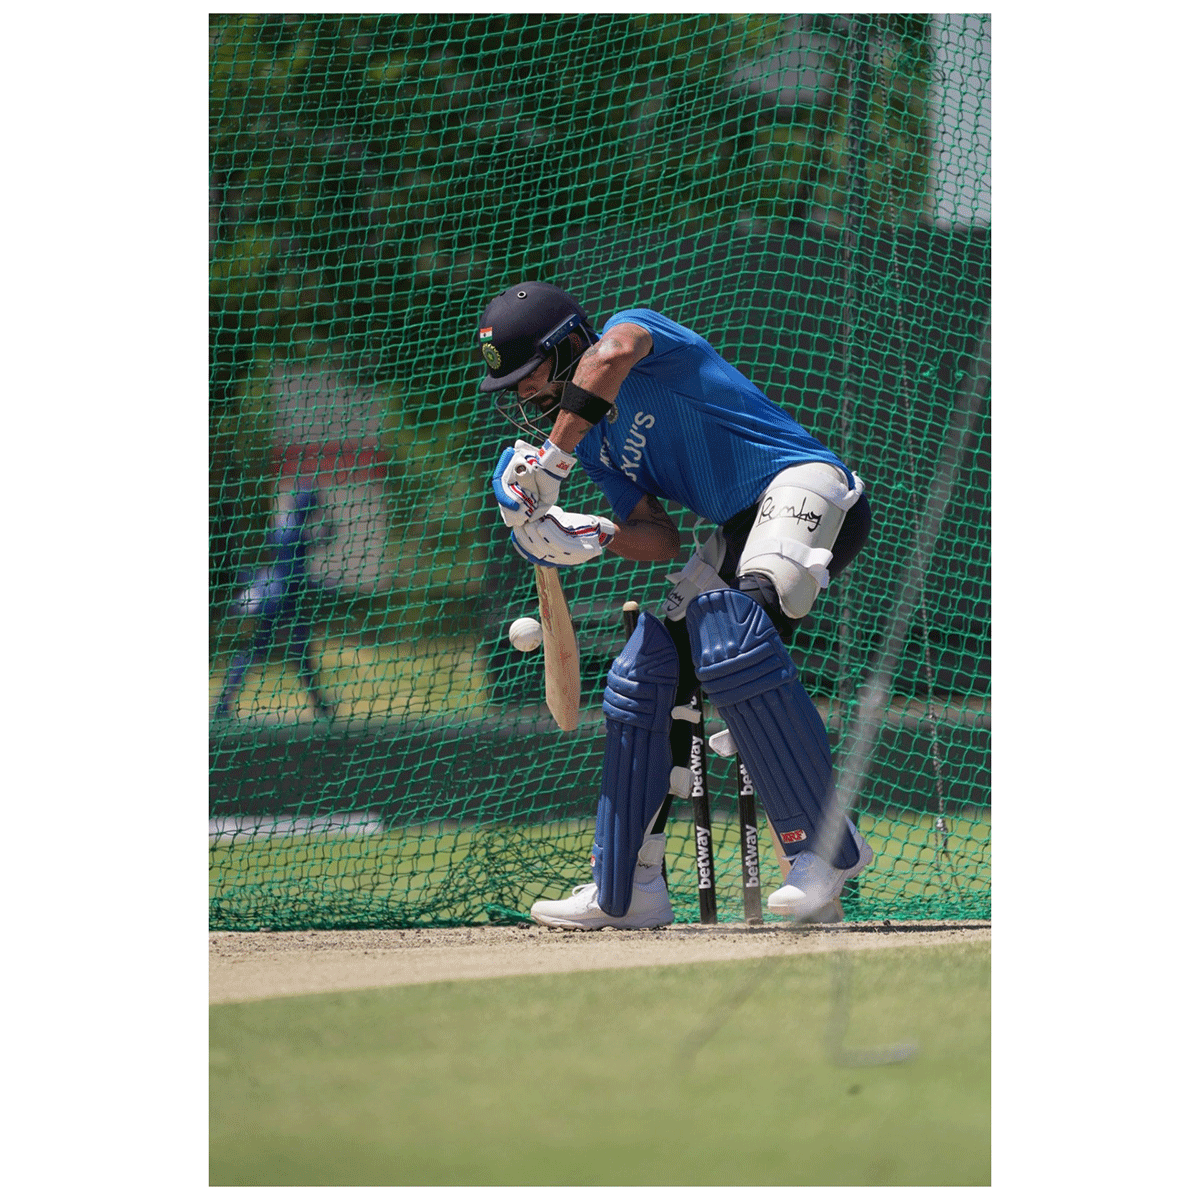 Virat Kohli bats in the nets on Tuesday, ahead of the 1st ODI vs South Africa